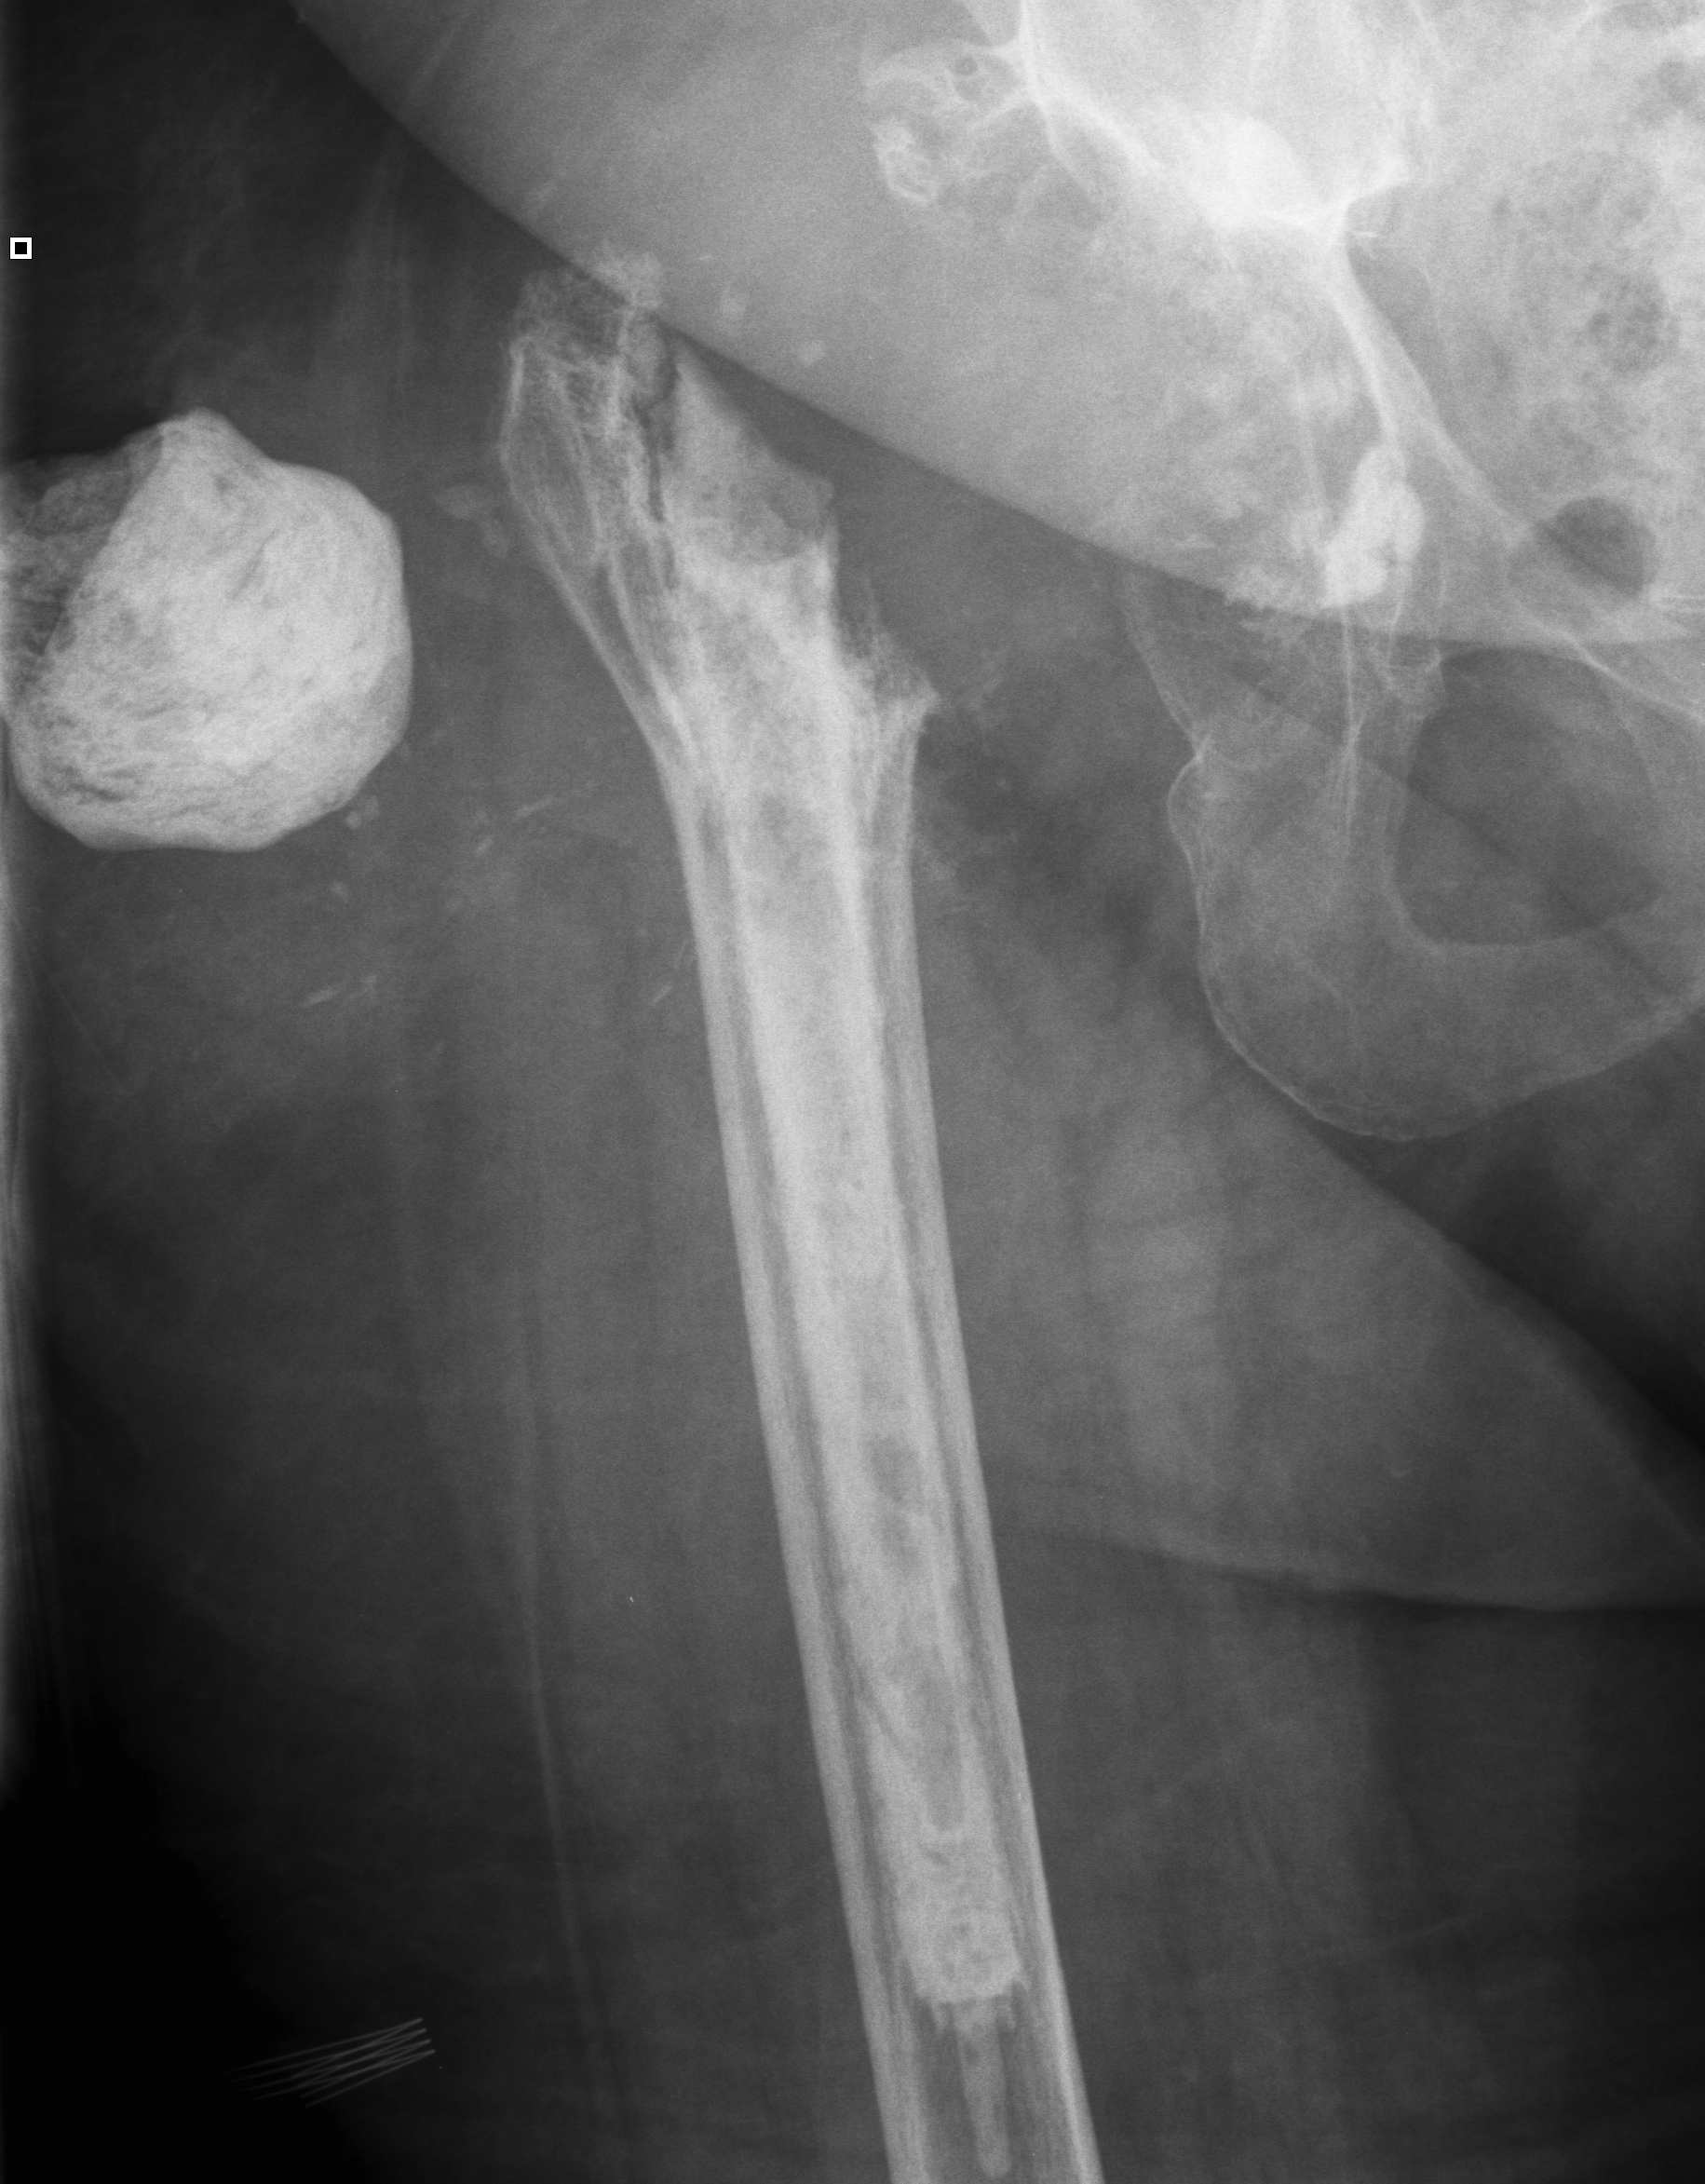 Infected THR Cement Spacer Fracture